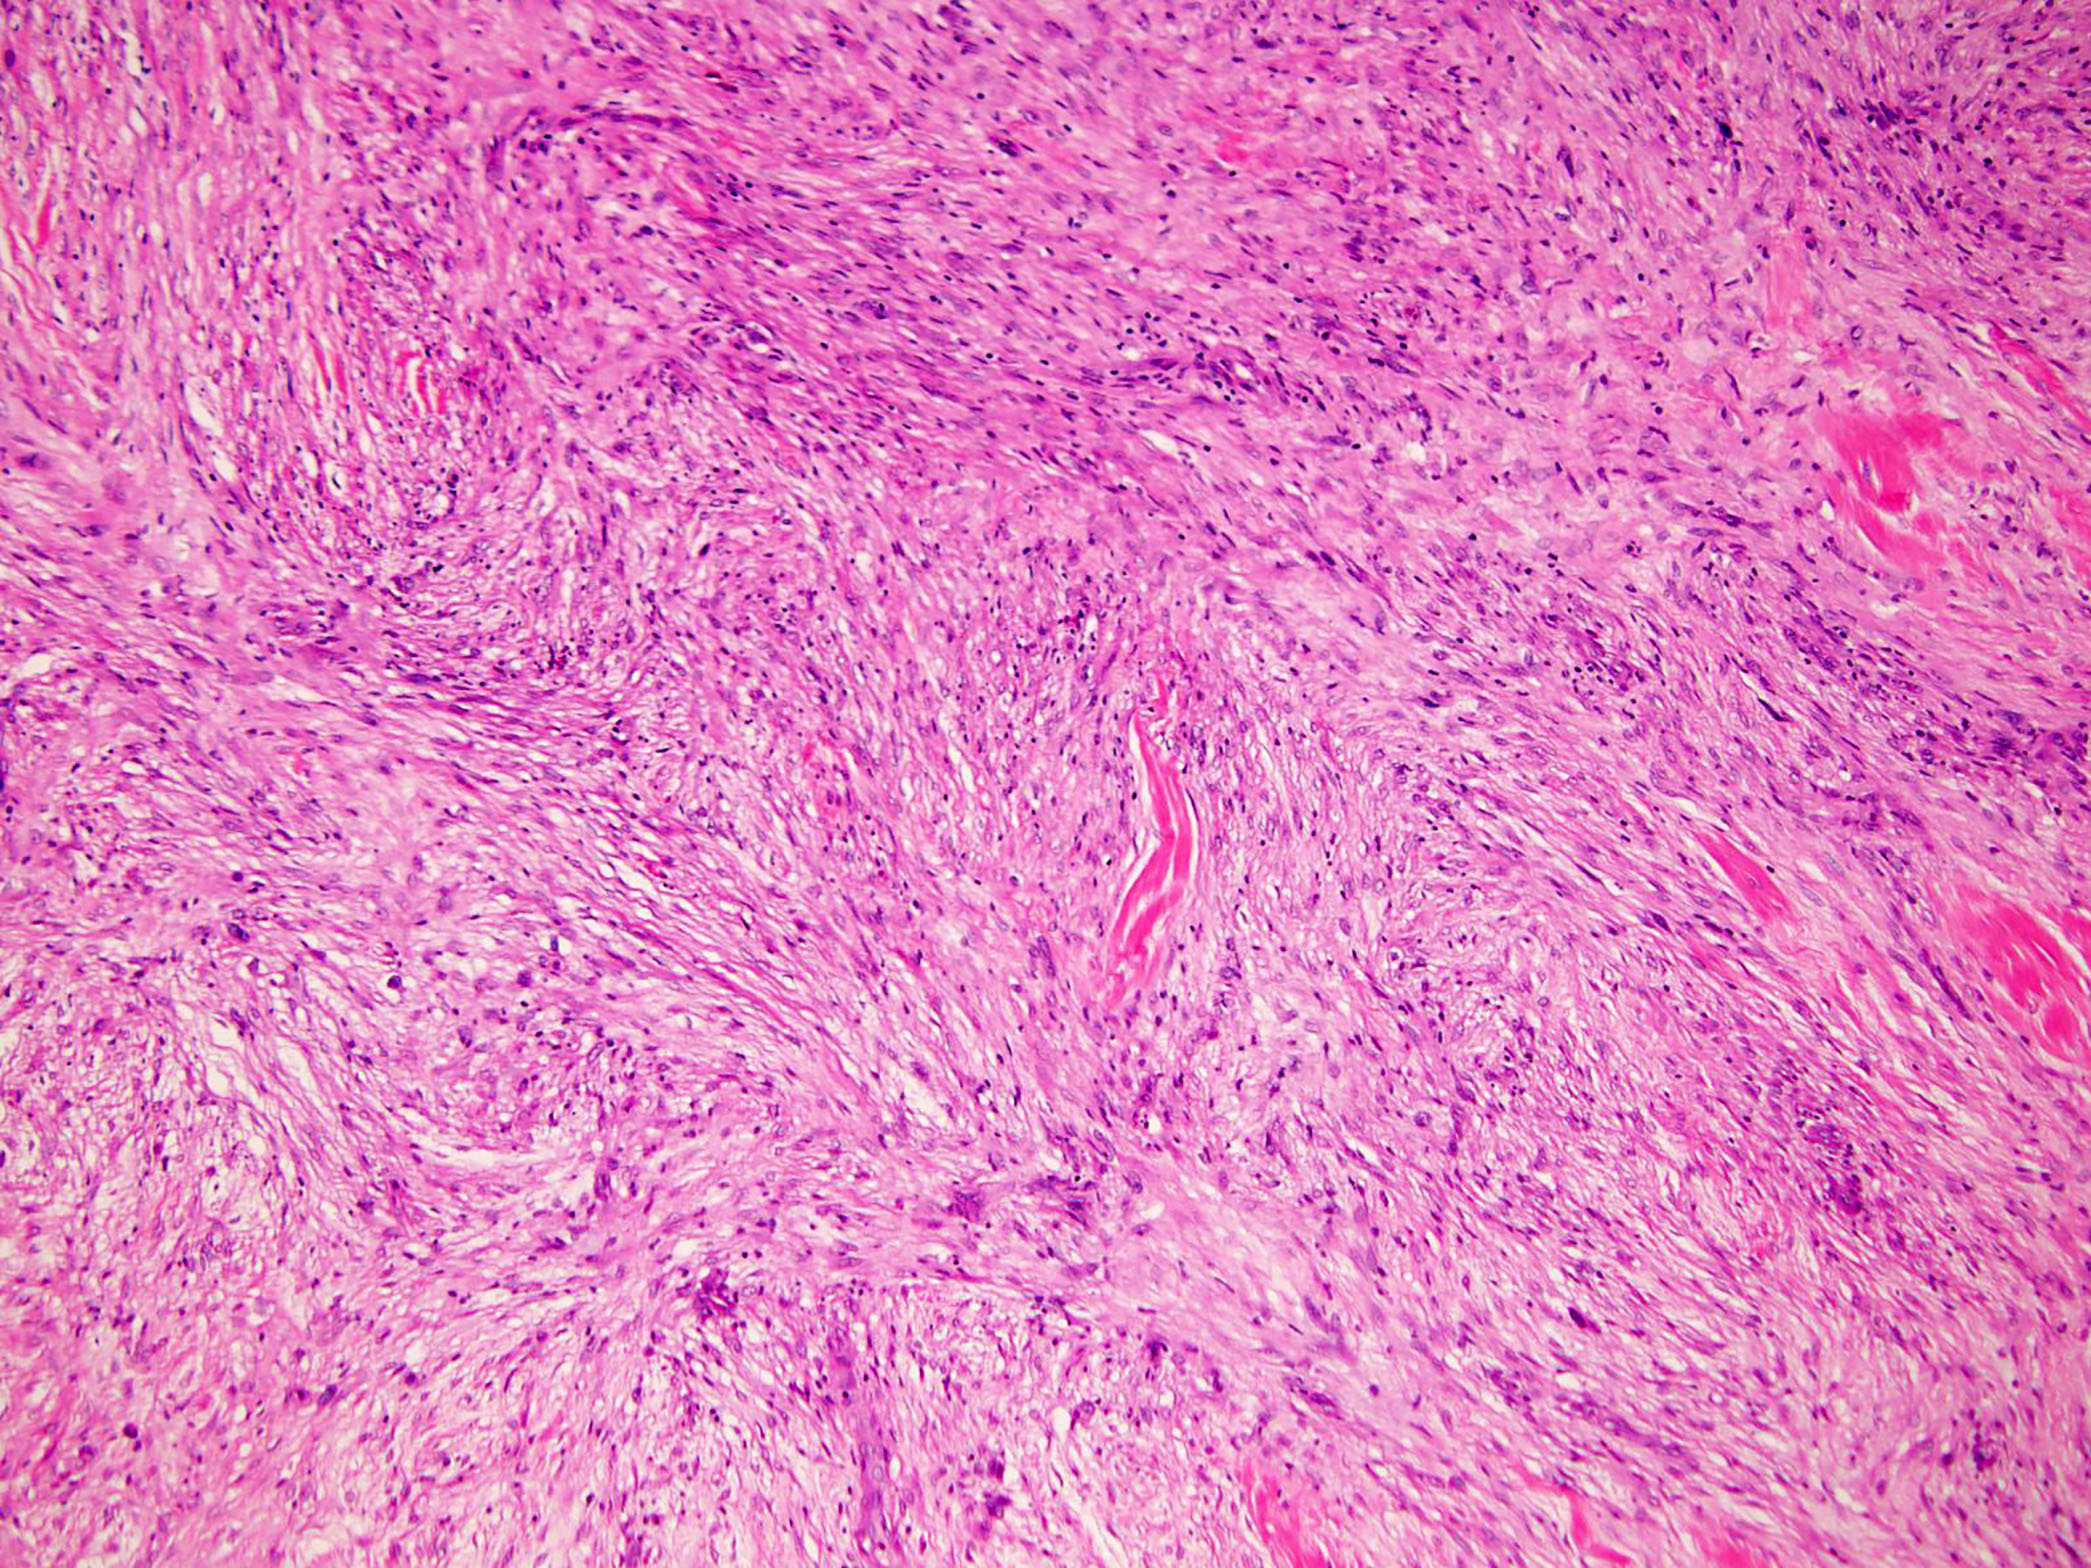 Spindle cell proliferation